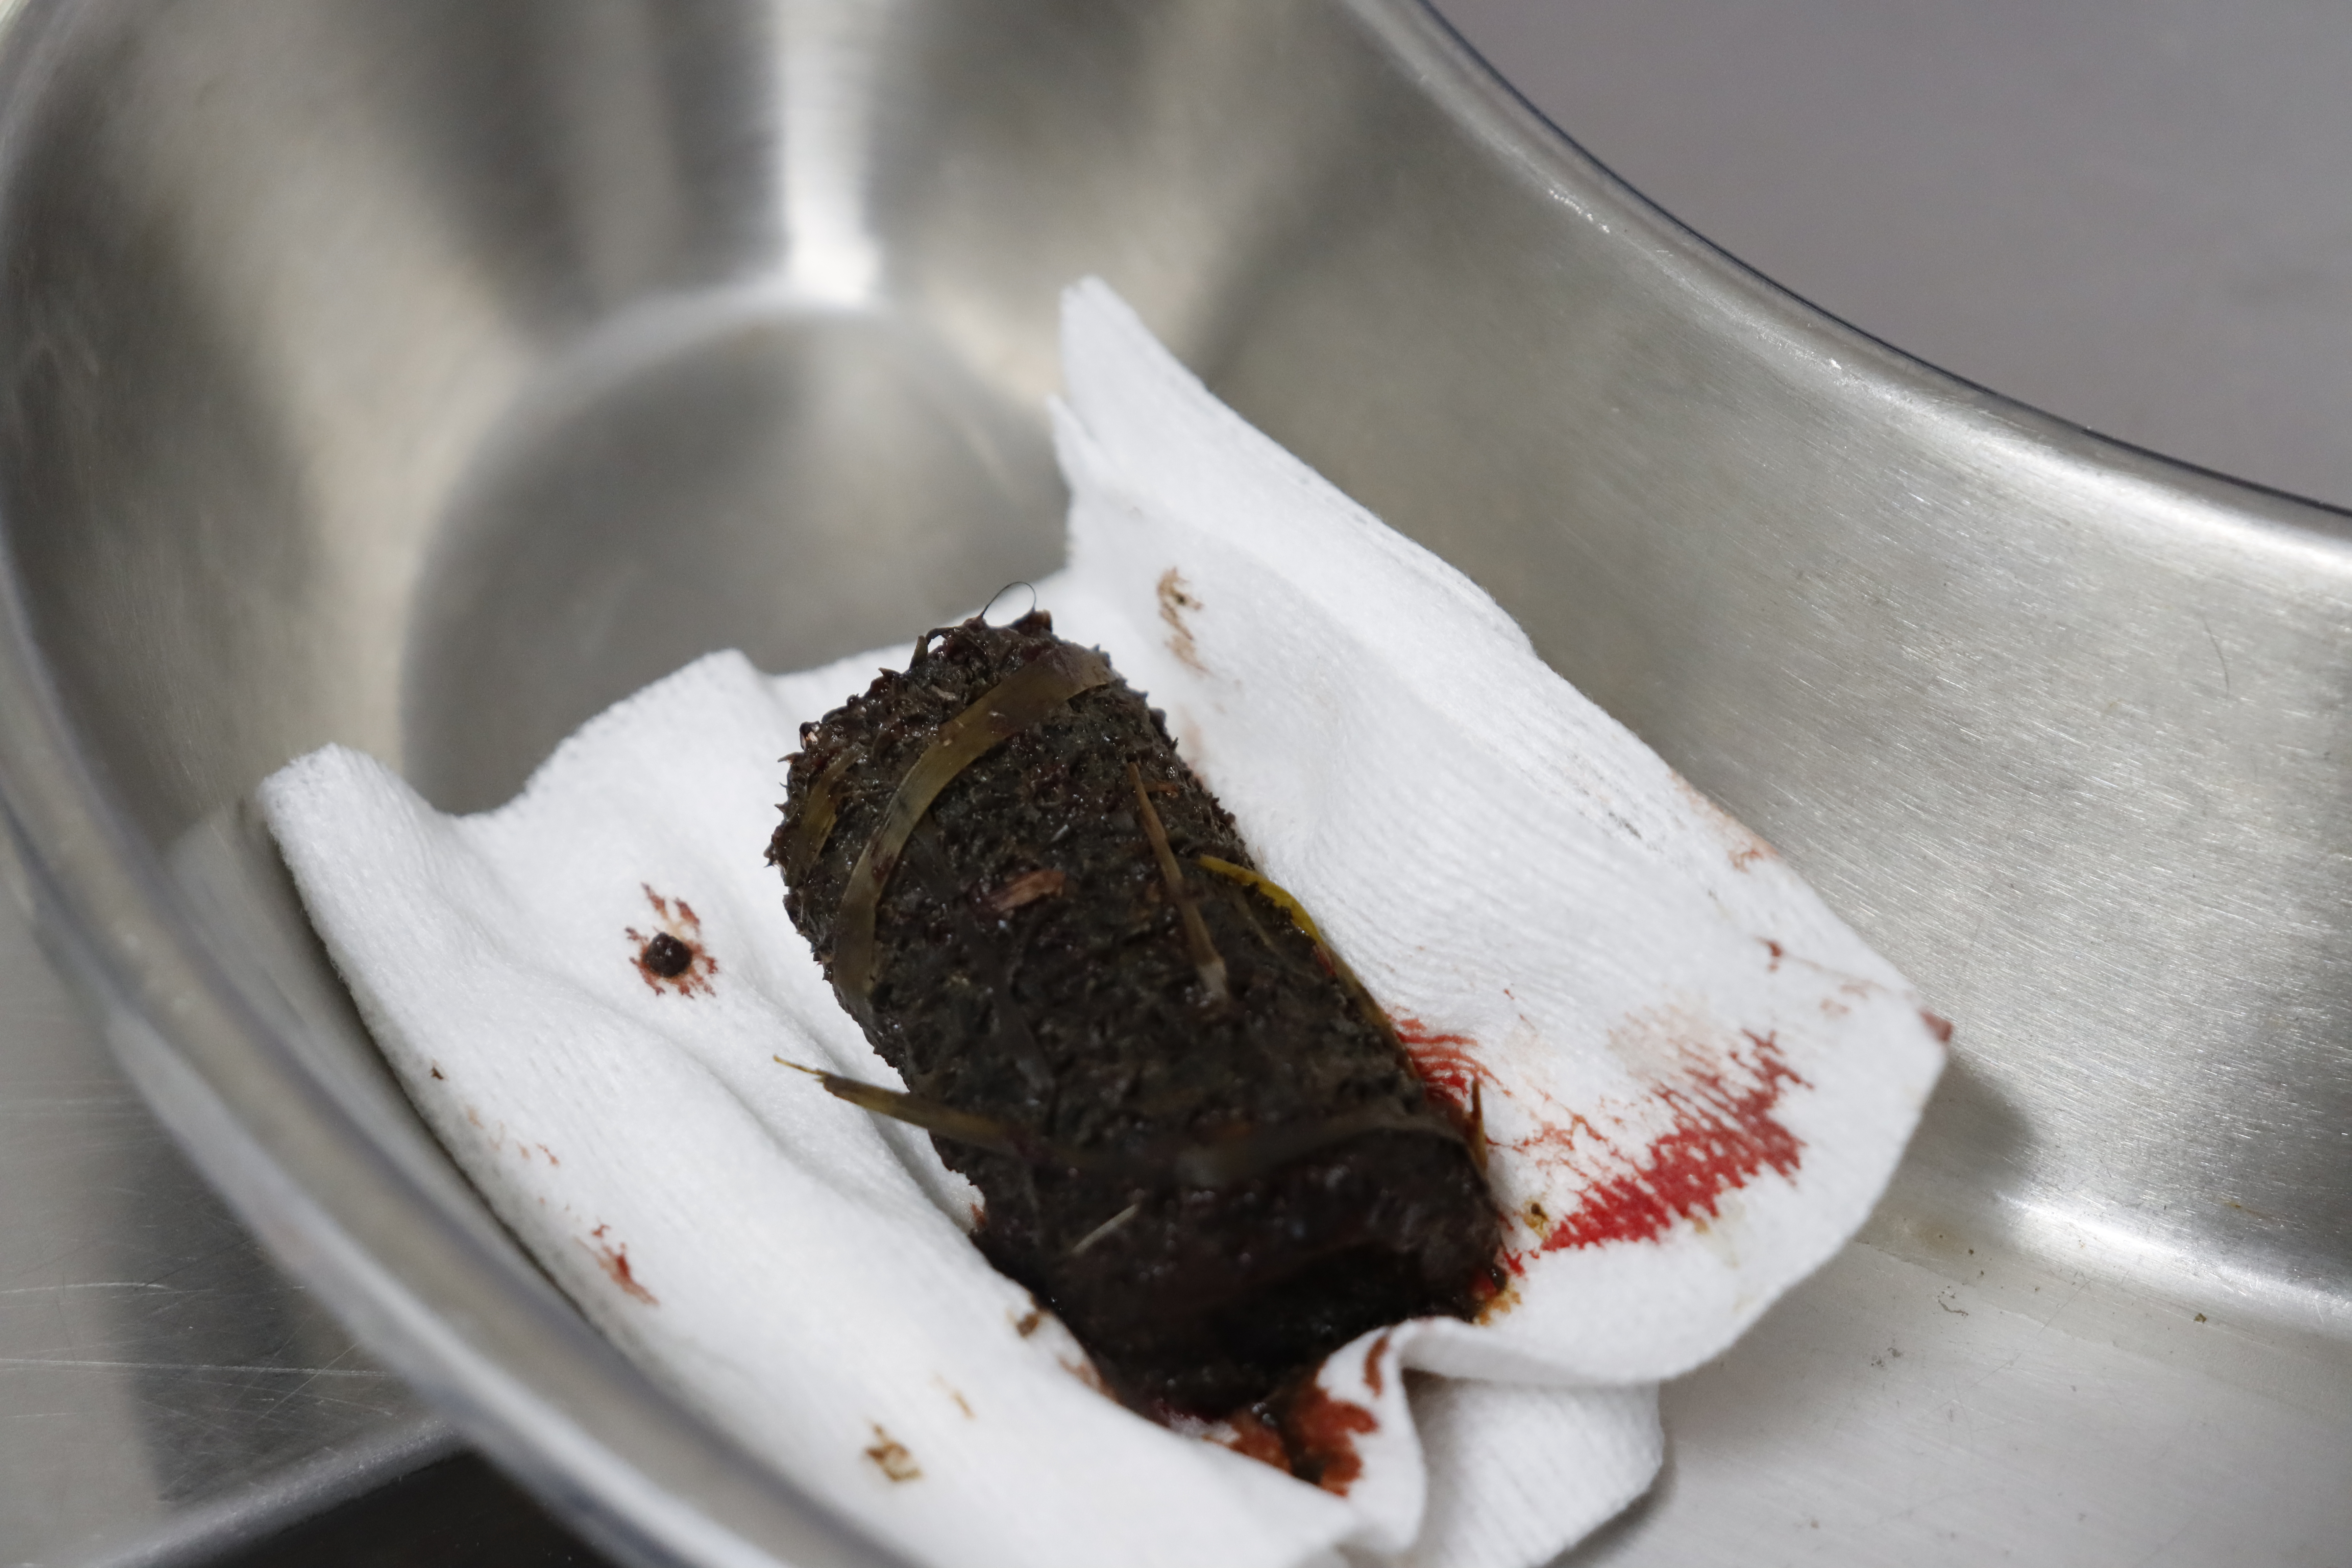 Black corn cob piece in surgical bowl with small drops of blood surrounding, just removed from a dog's intestine.